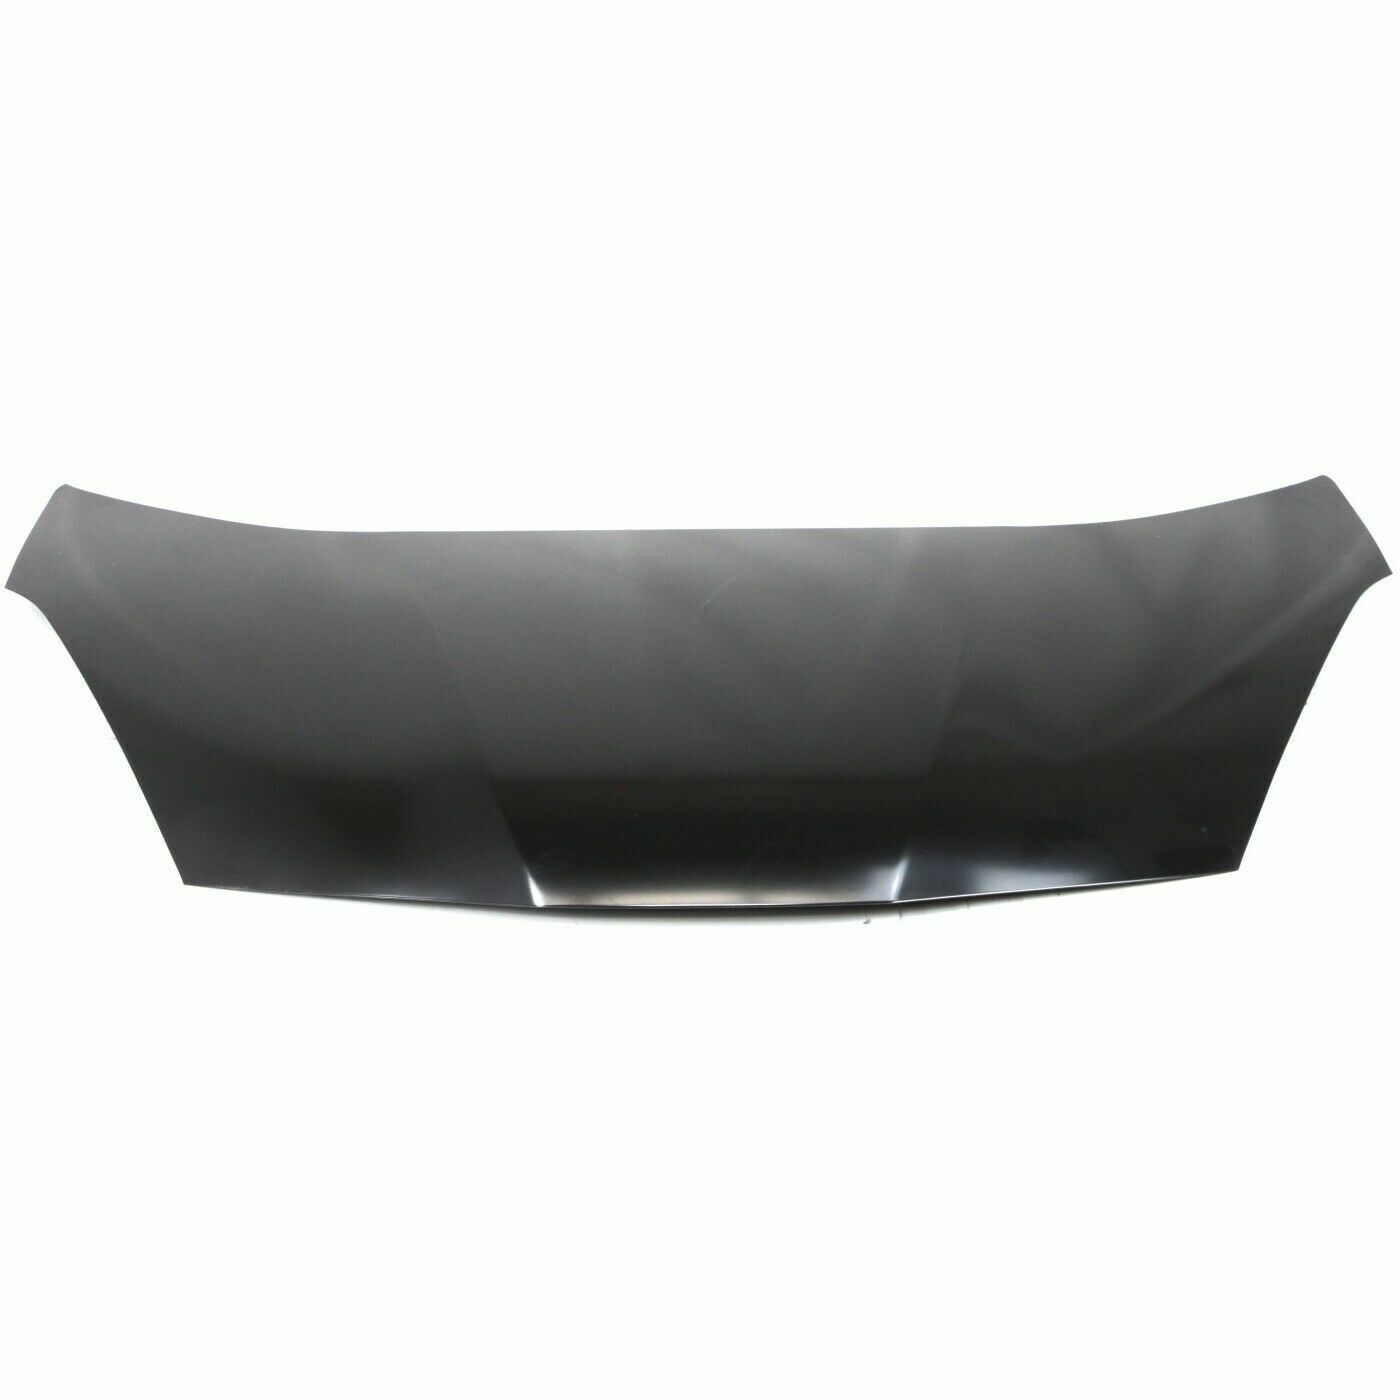 2009-2014 HONDA FIT Hood Painted to Match